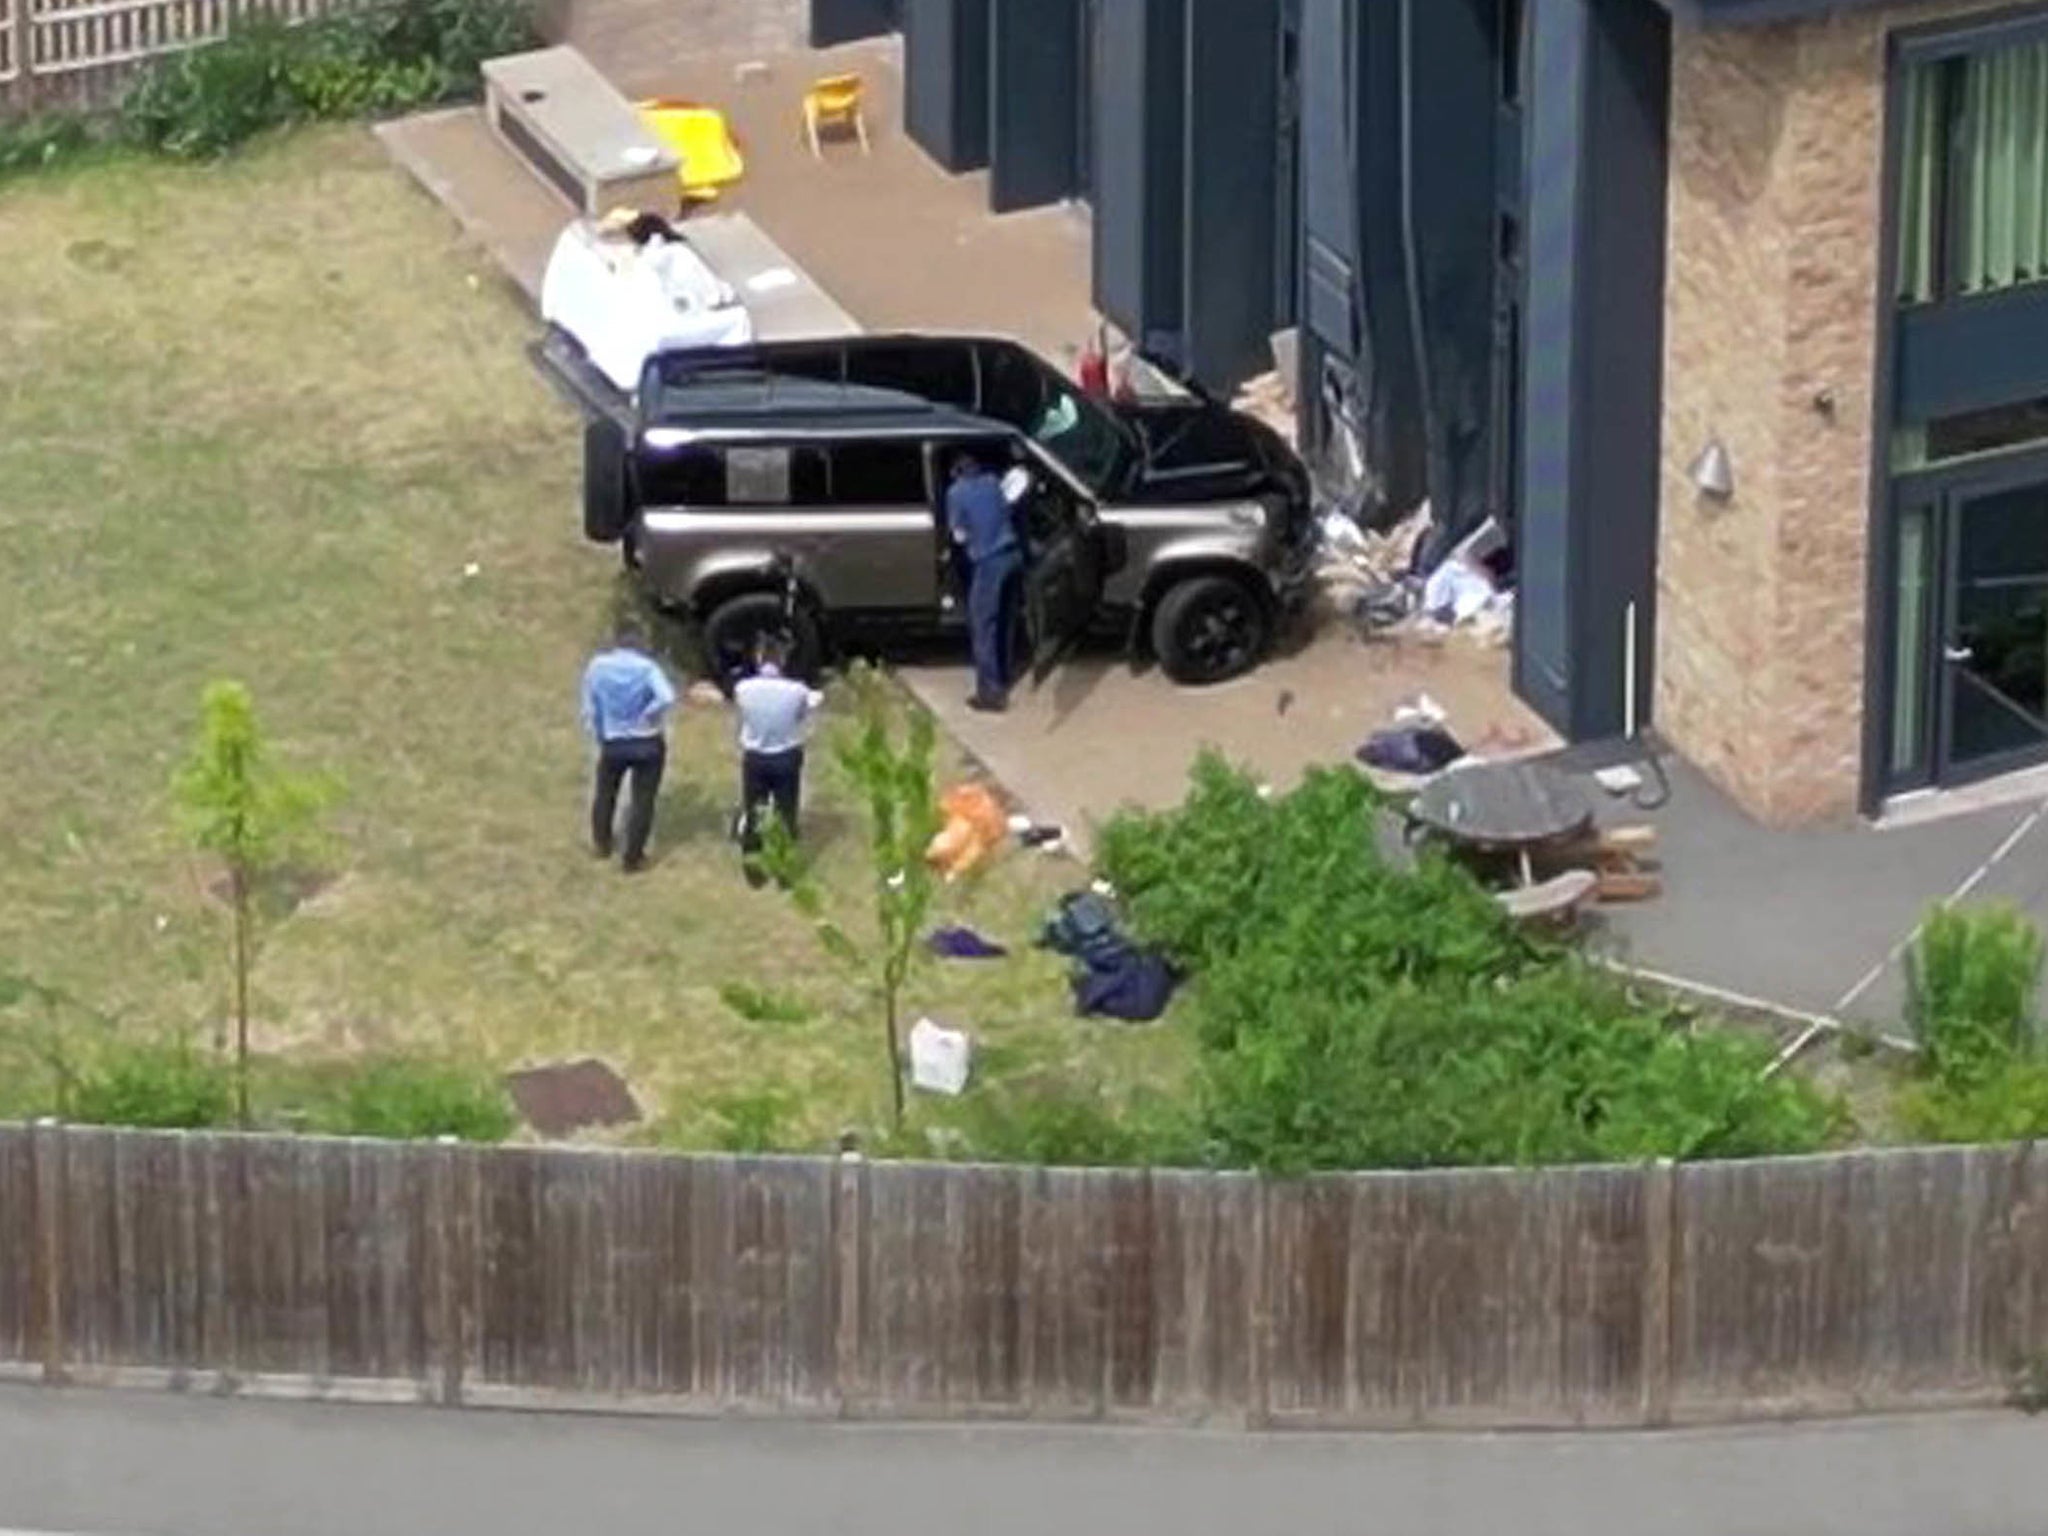 The gold Land Rover crashed through the school gates and killed two pupils